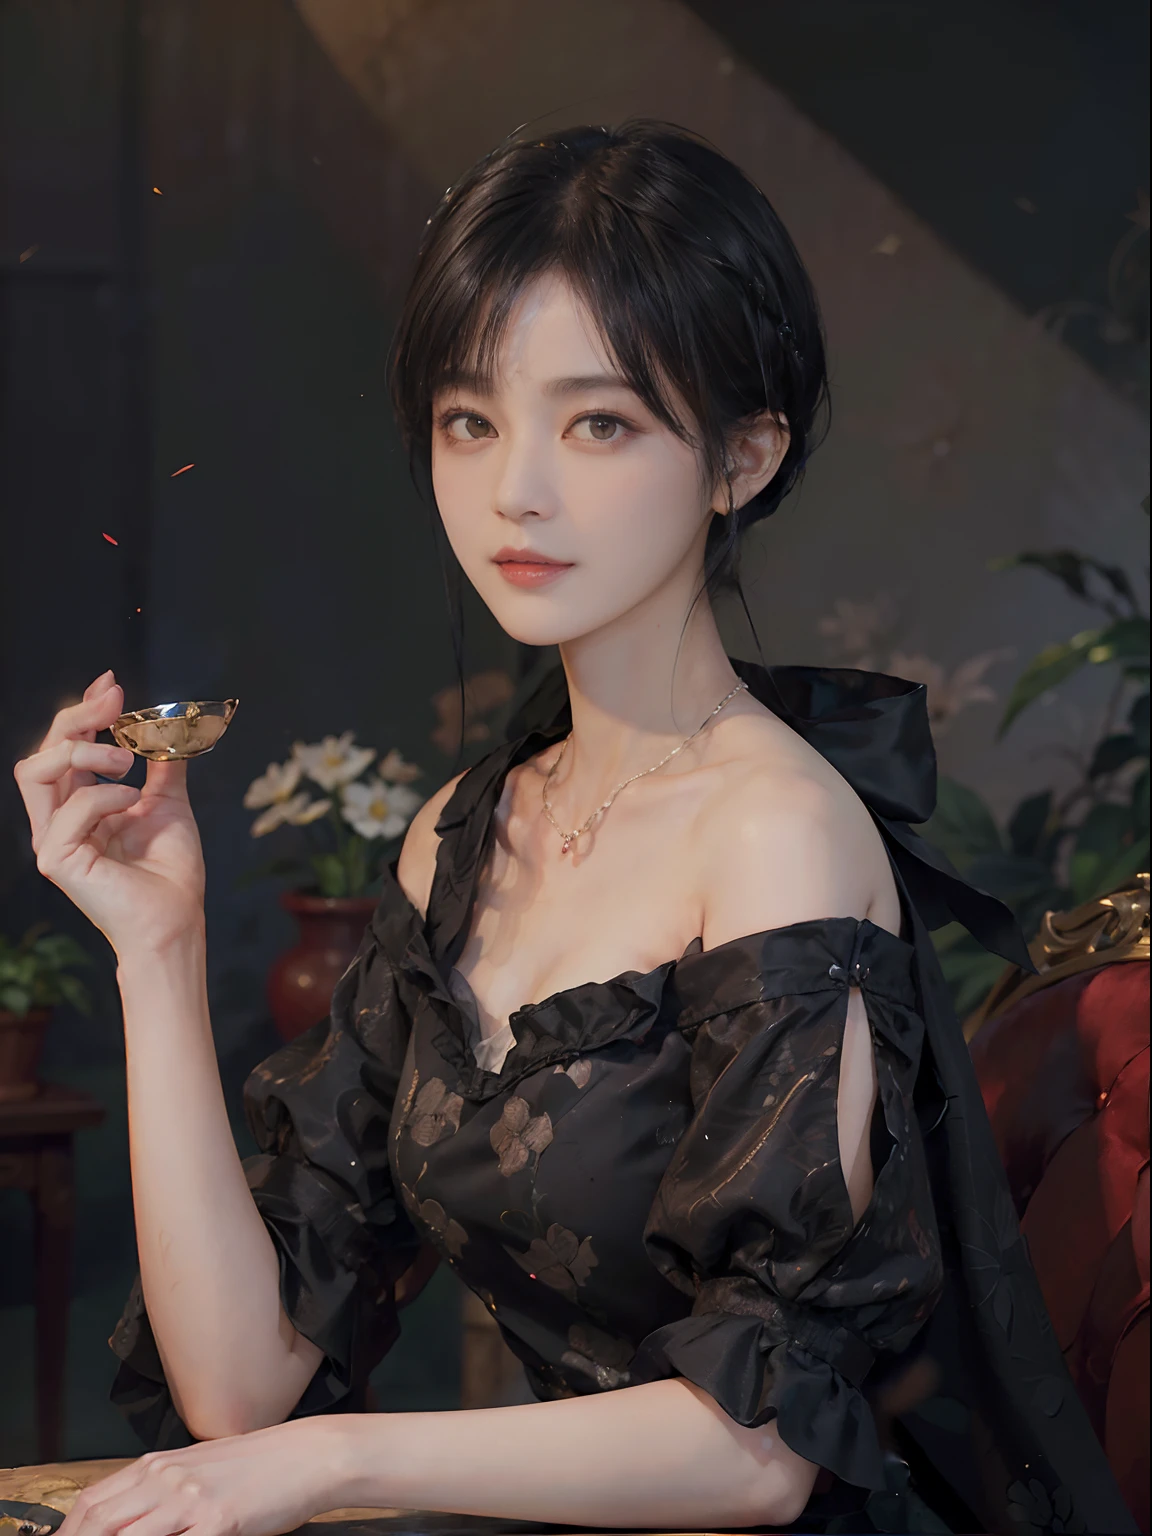 ((1womanl)),  (((Black Shorthair))), （masuter piece：1,3）、top-quality、​masterpiece、hight resolution、Original、highly detailed wallpaper、dress code、Luxurious necklace, A slight smil、a small face、(Breast)、(Light on Face)、Live-action style, Beautiful facial features, darkened room, ((Hu Dilan))